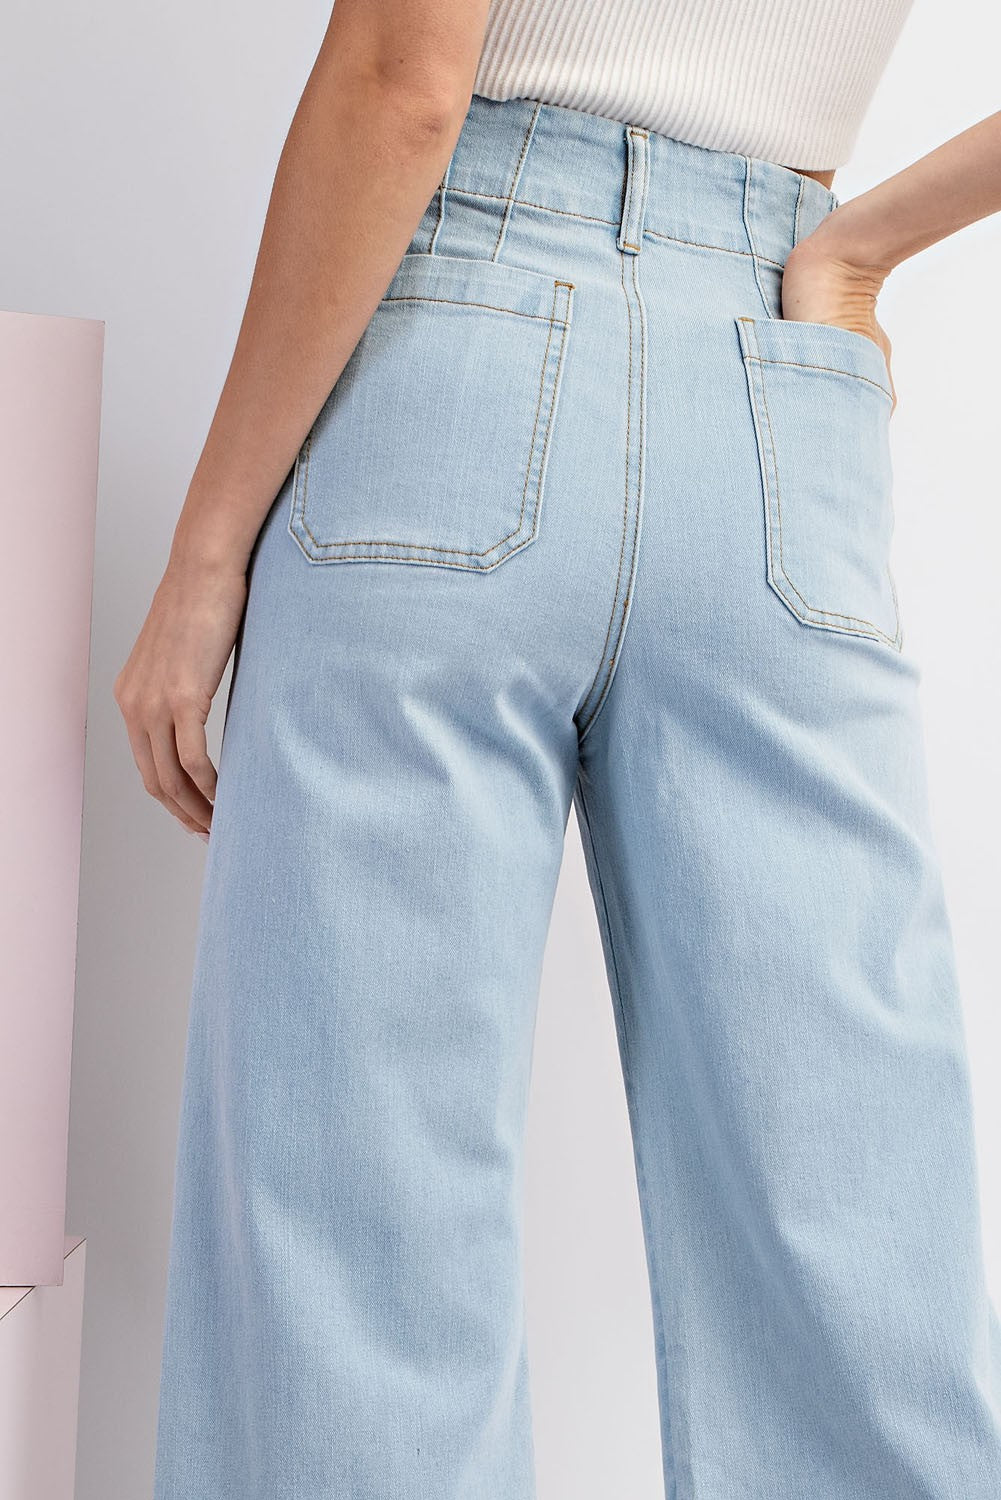 Denim Mineral Washed, High Waisted Jean Pants